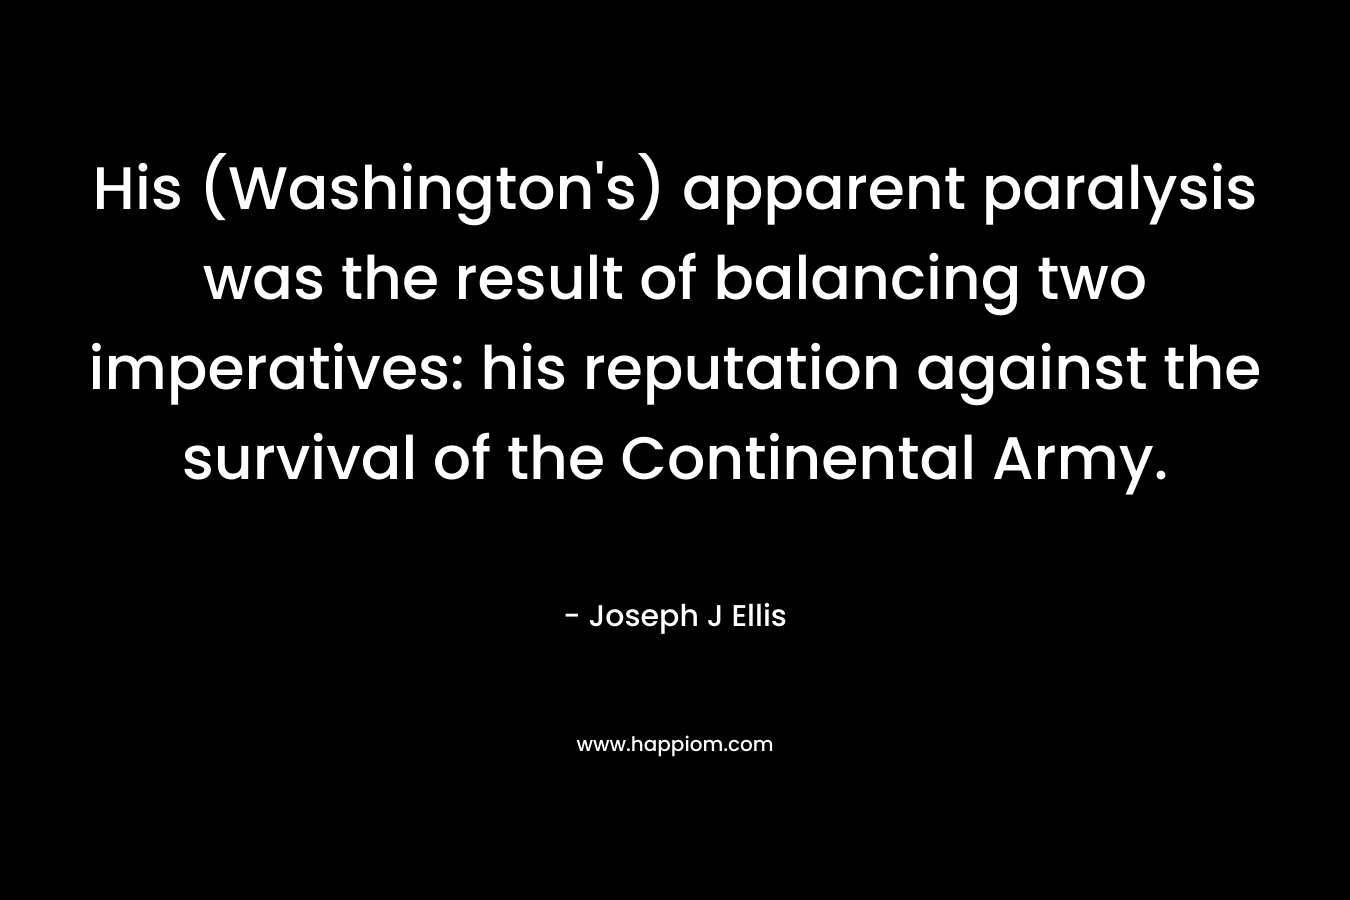 His (Washington’s) apparent paralysis was the result of balancing two imperatives: his reputation against the survival of the Continental Army. – Joseph J Ellis